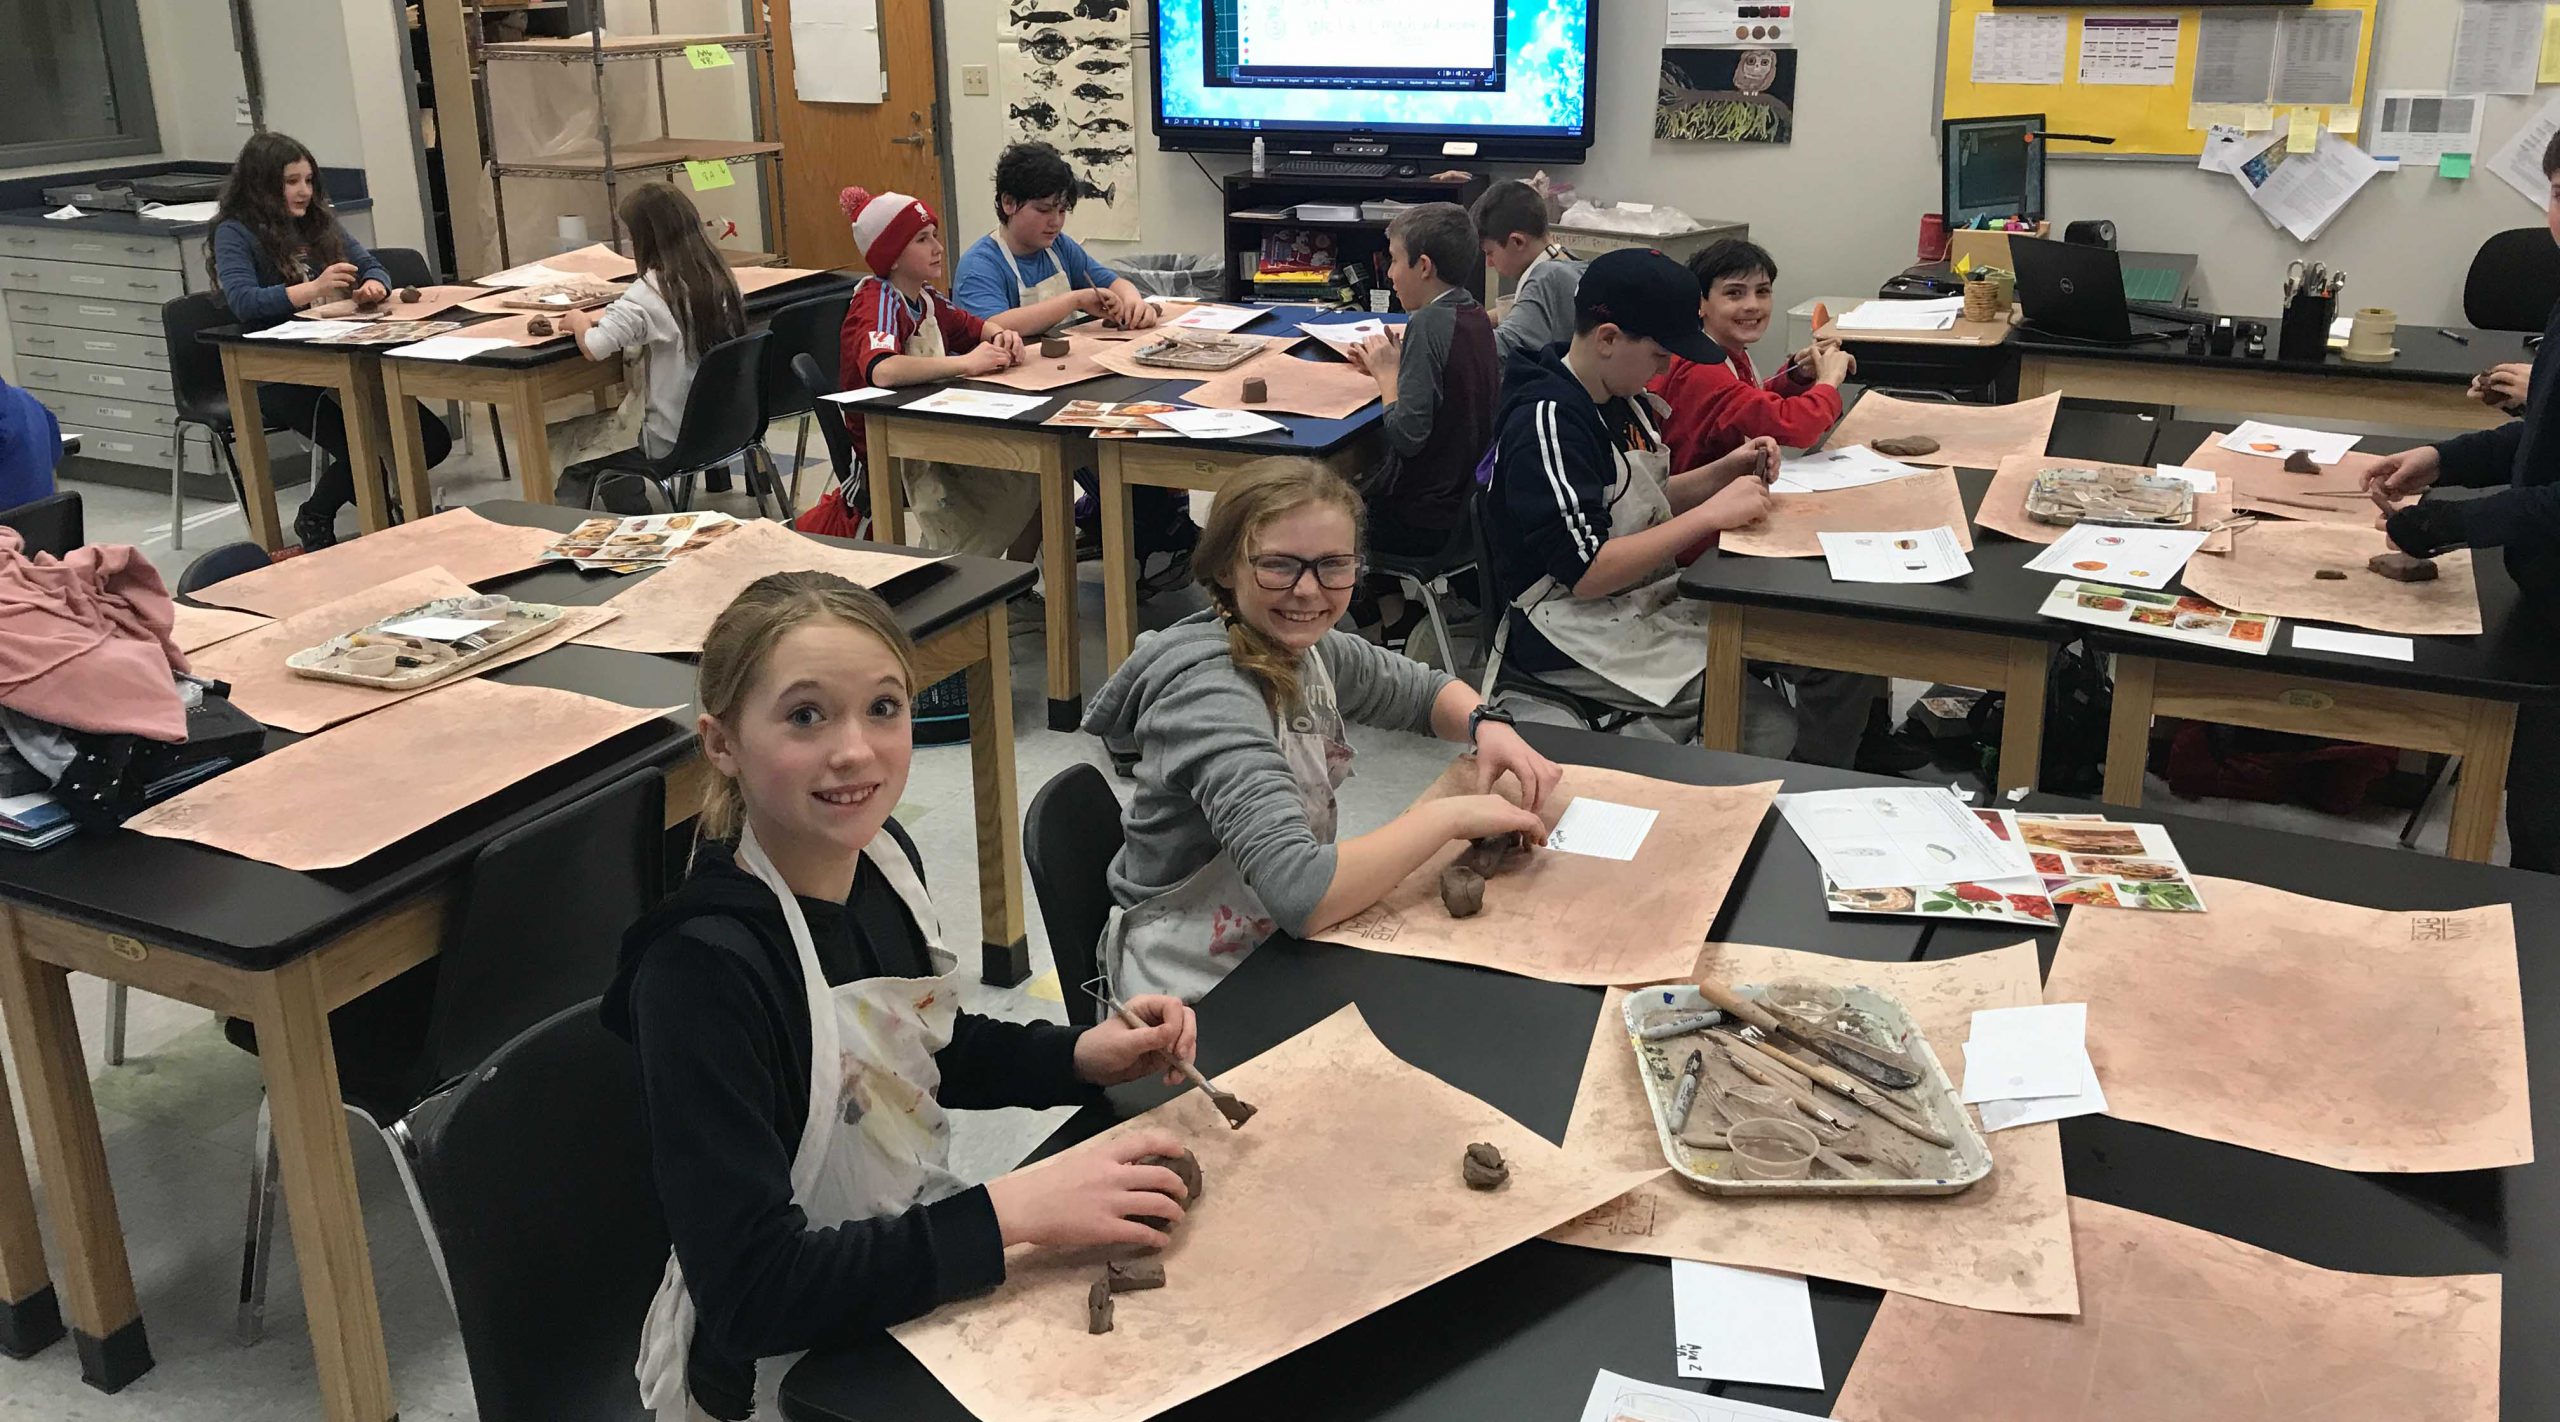 Students working with clay on tables.